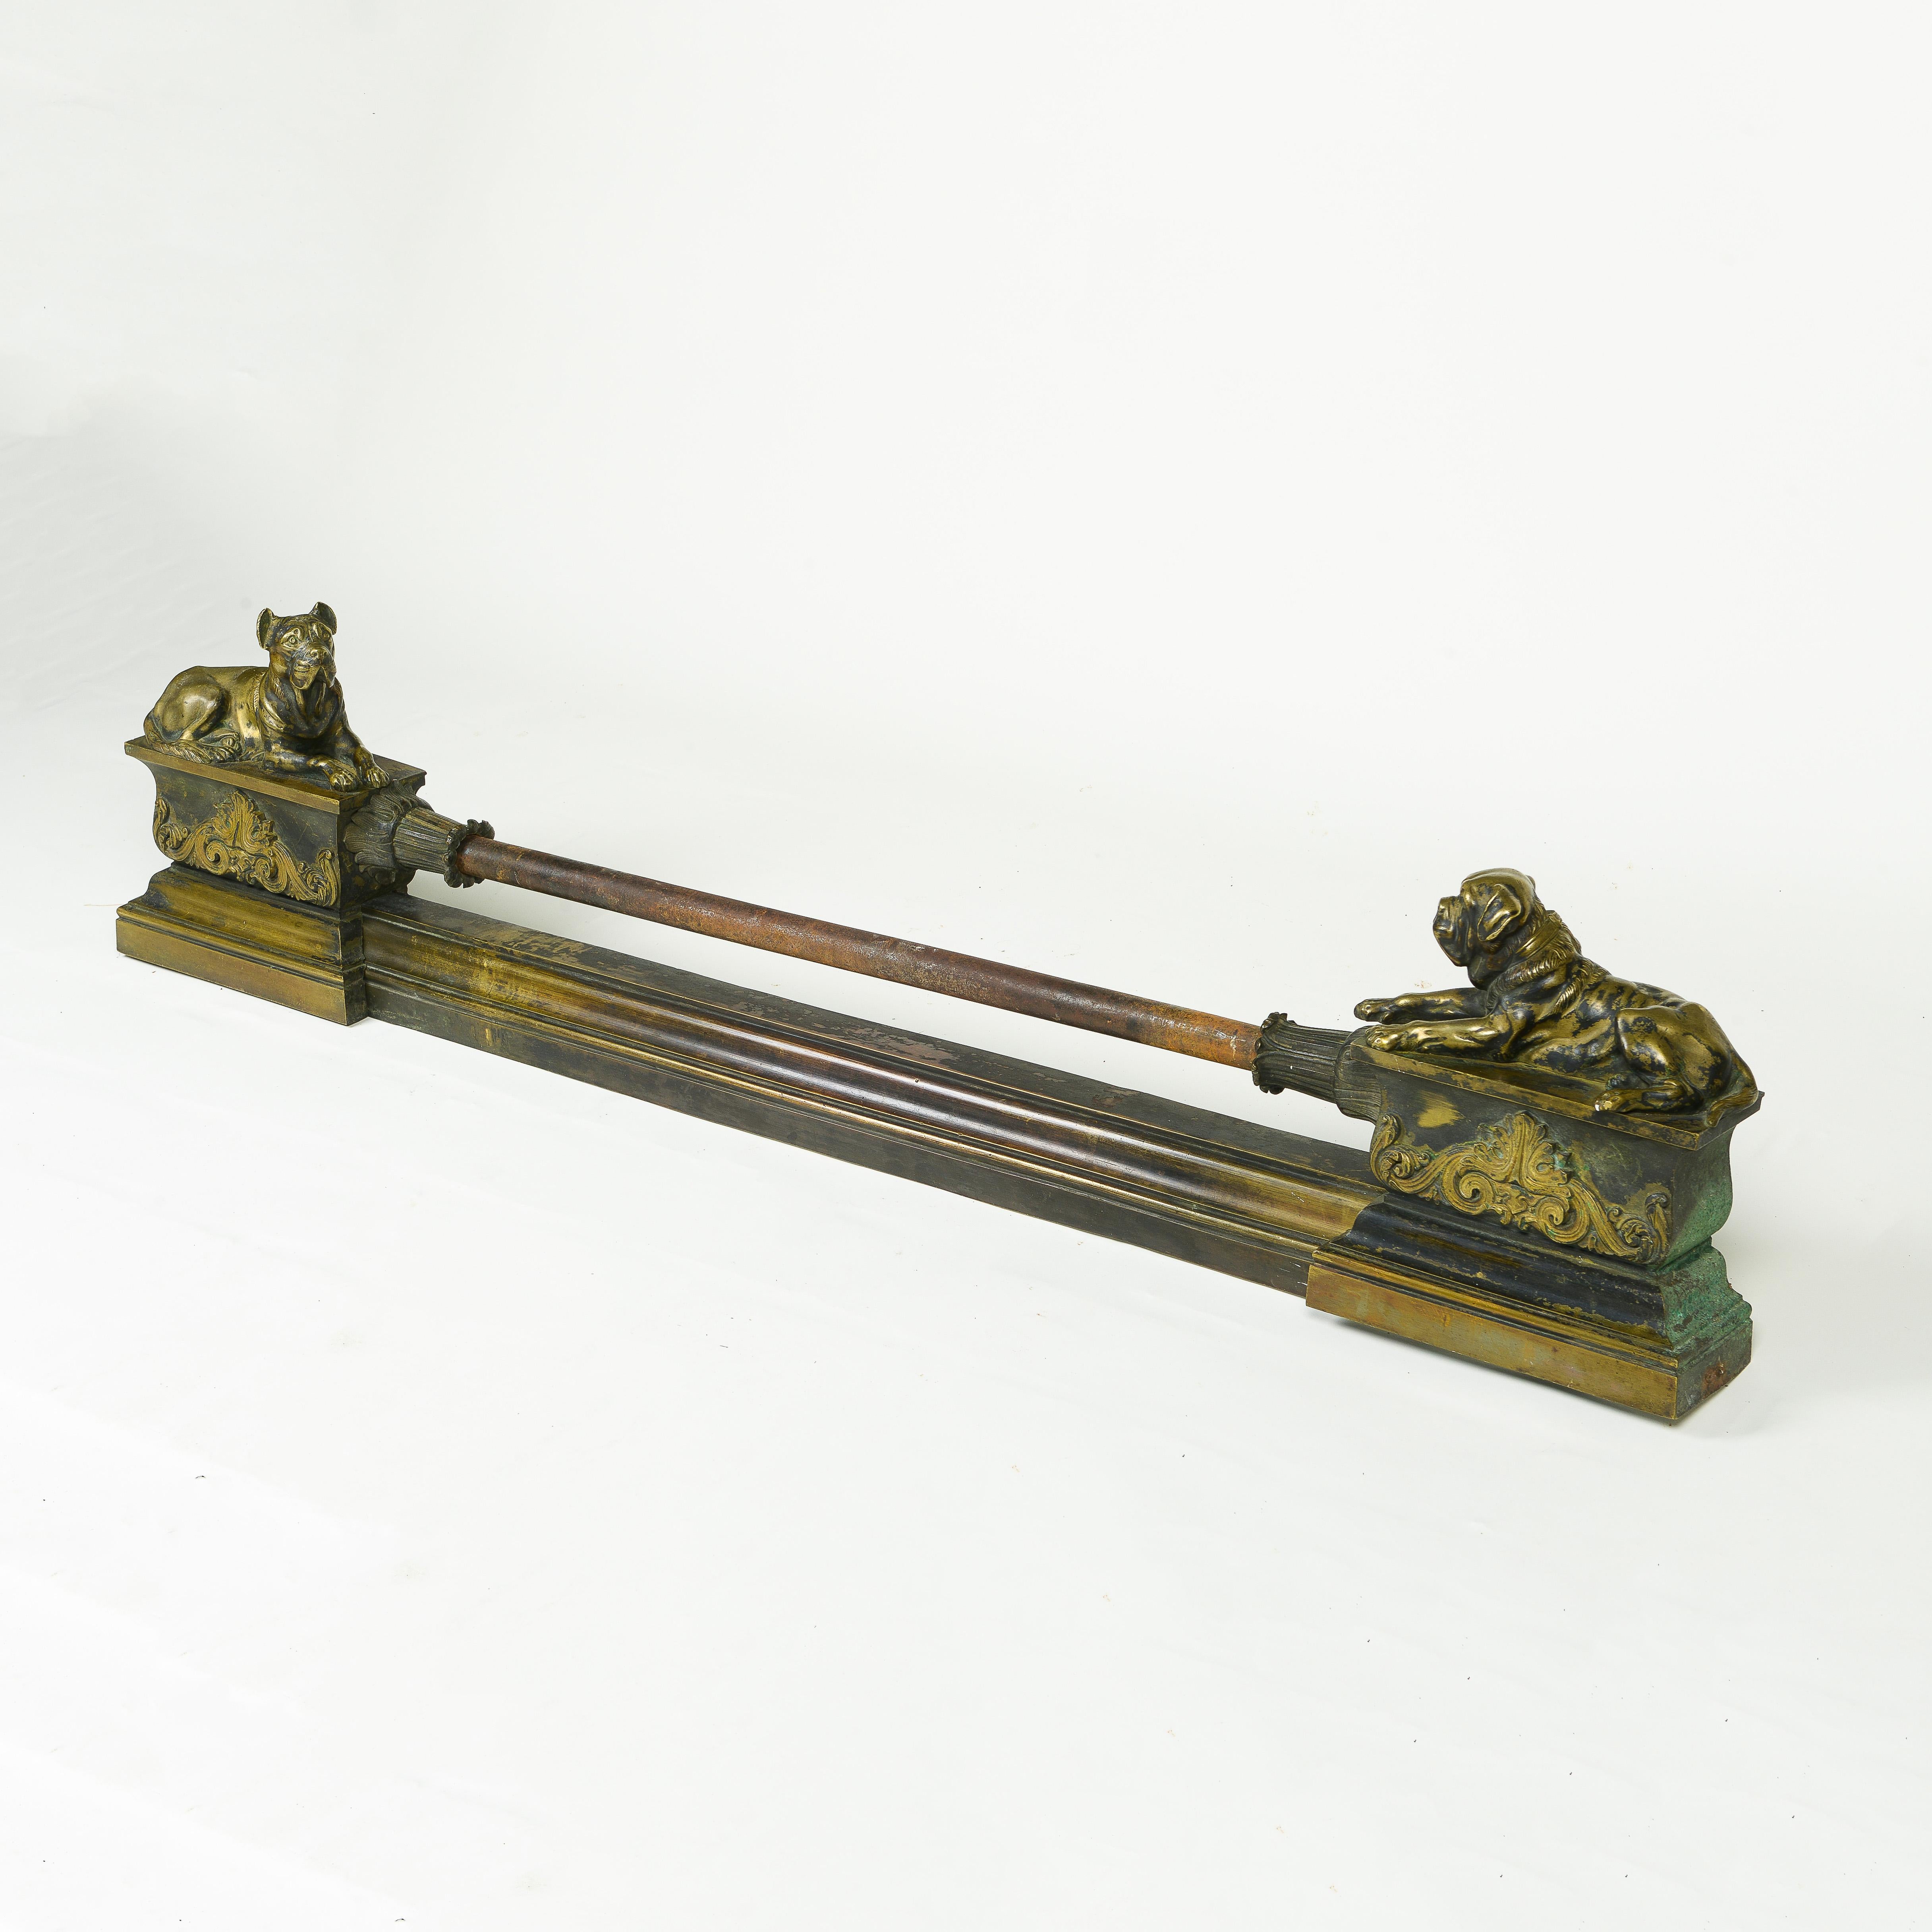 The lotus leaf-wrapped front rail set between two pedestals, one surmounted by a recumbent boxer and the other with a bull dog.